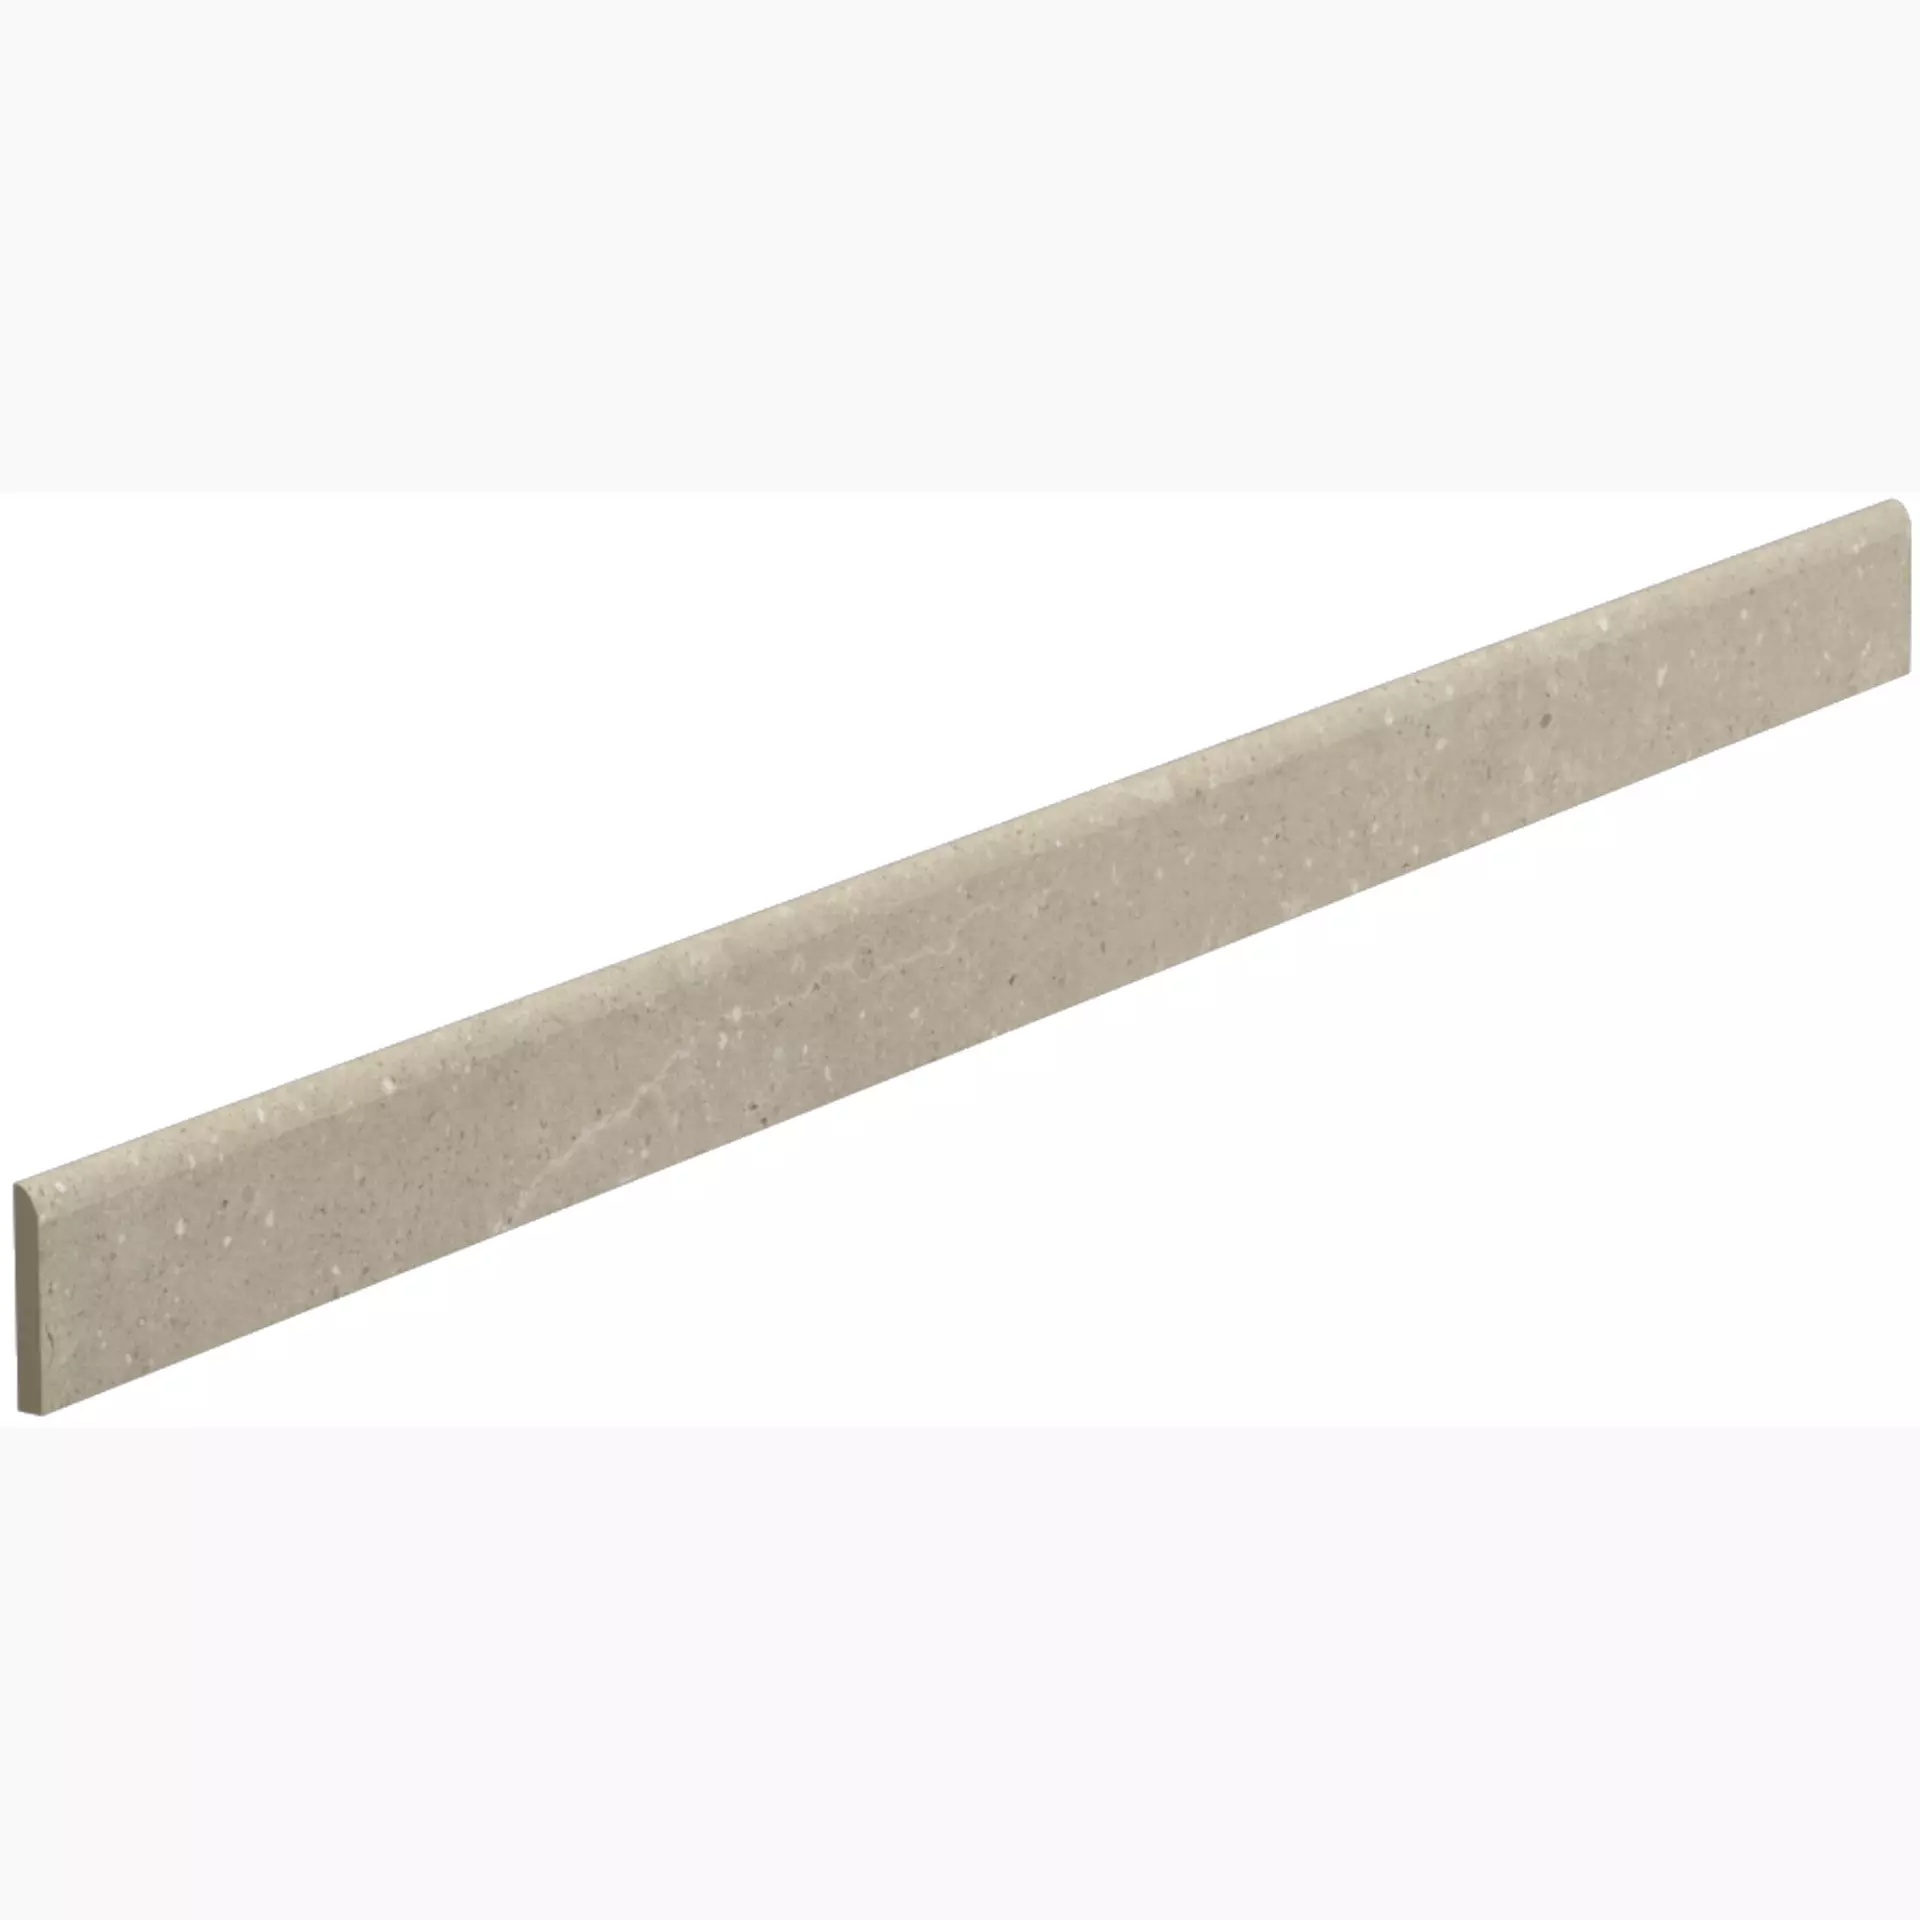 Del Conca Hwd Wild Greige Hwd11 Naturale Skirting board G0WD11R12 7x120cm rectified 8,5mm